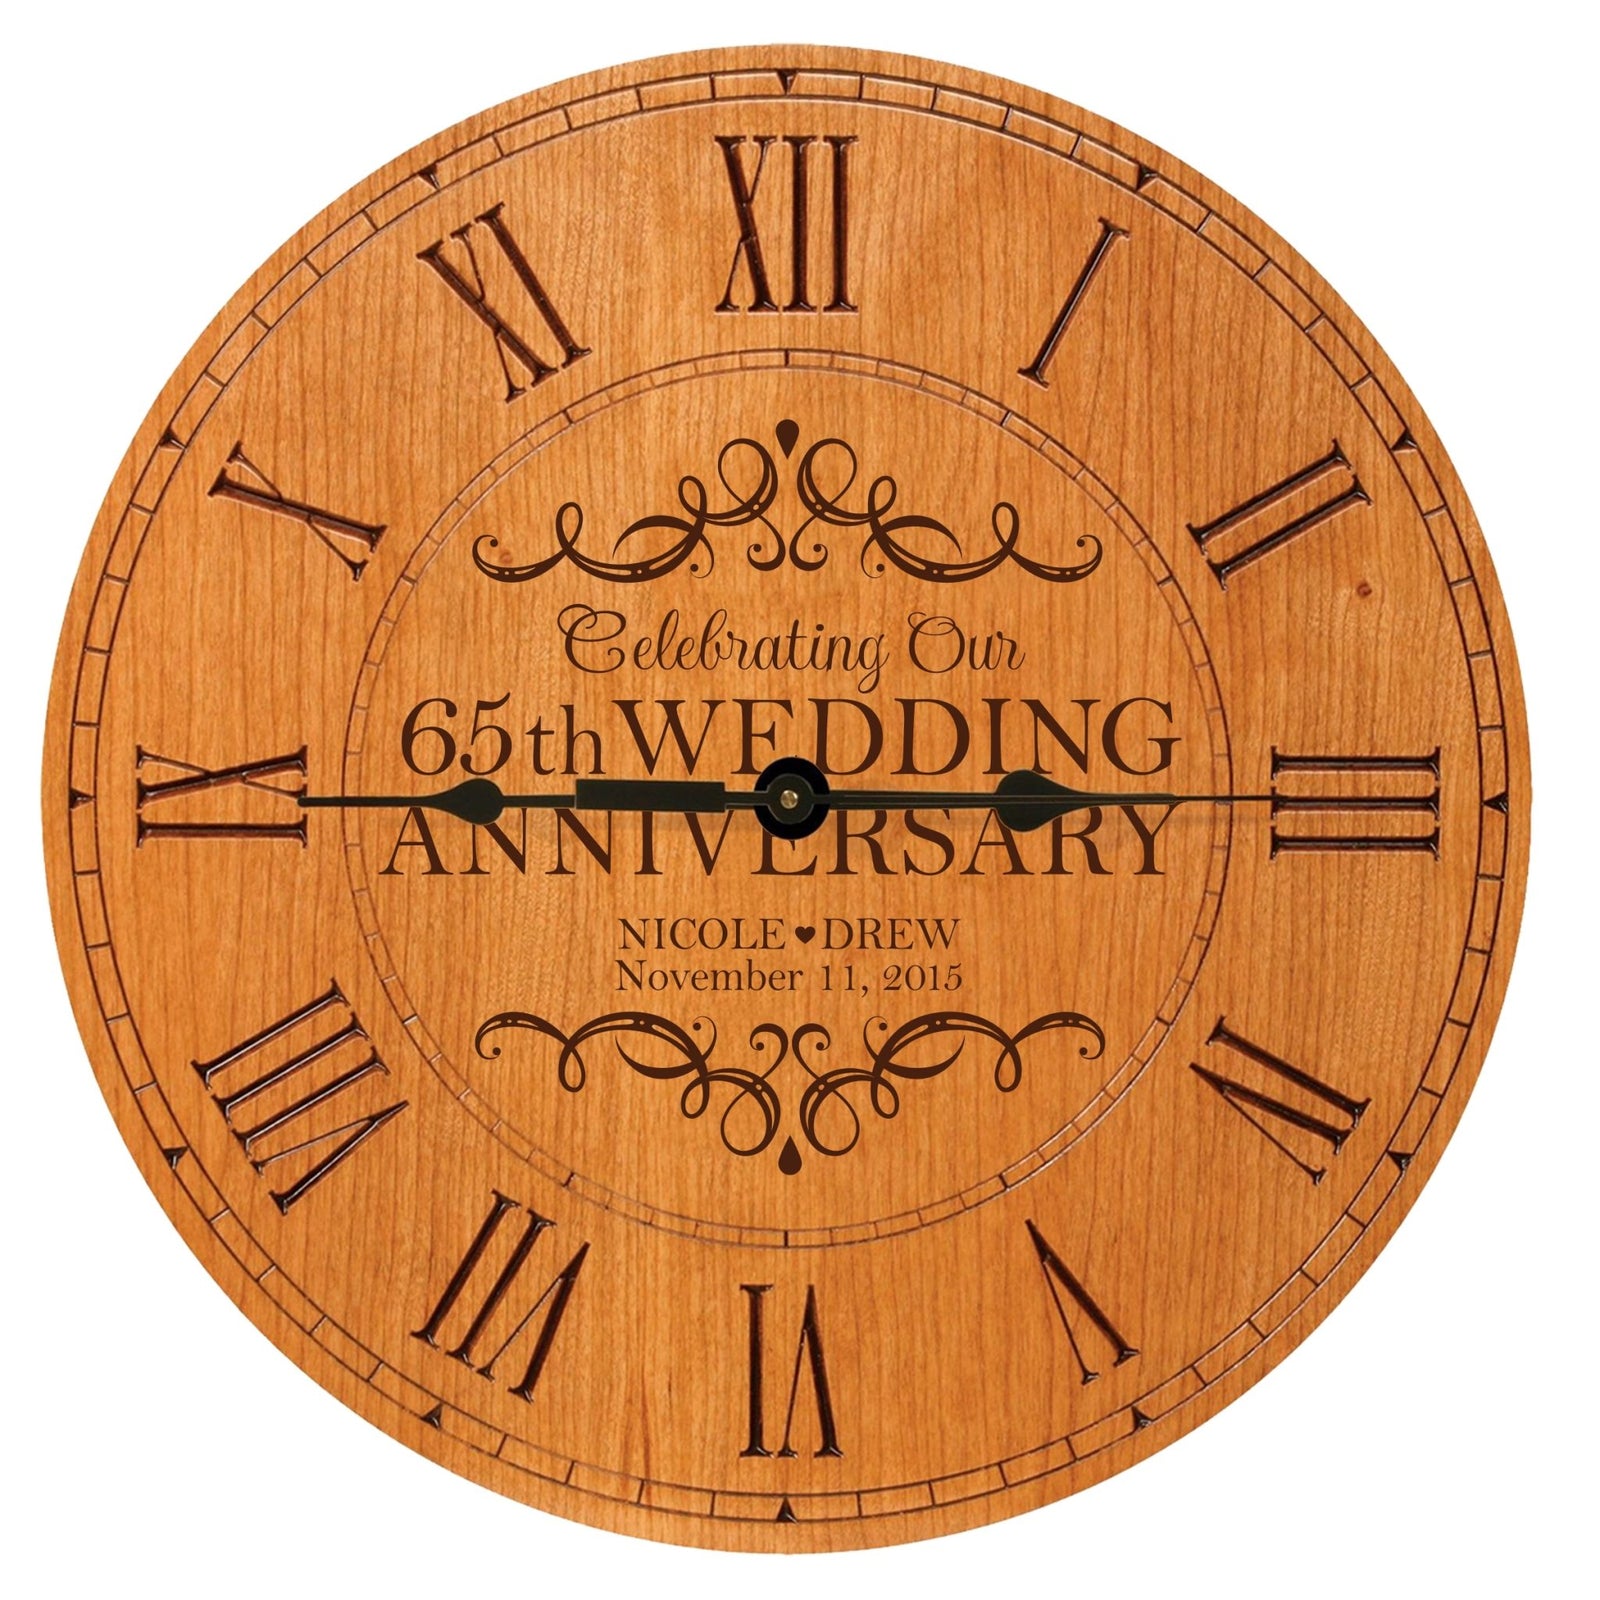 Lifesong Milestones Personalized Engraved Wooden Wall Clock for 65th Wedding Anniversary Gift Ideas